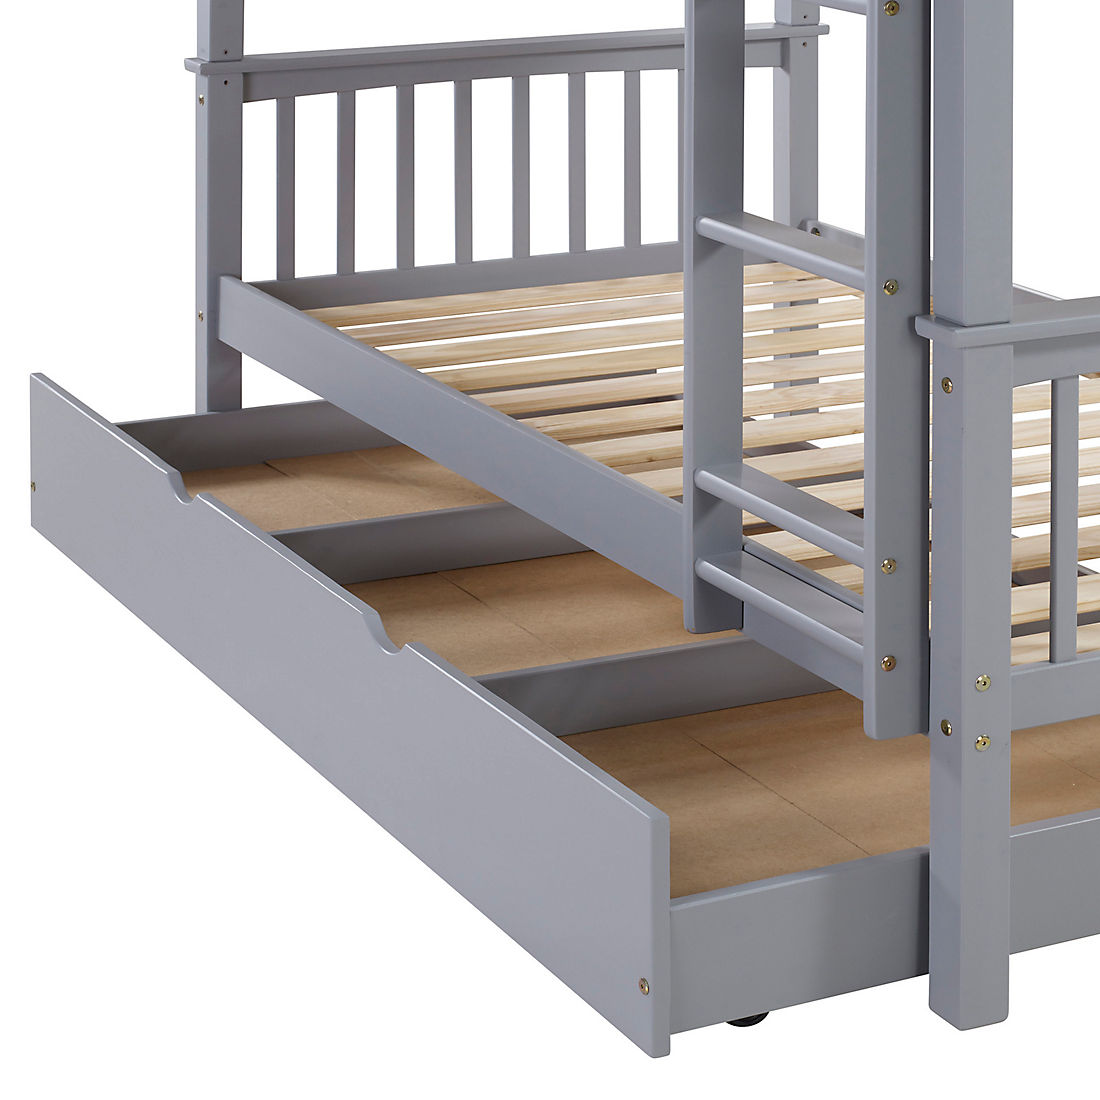 W Trends Twin Size Solid Wood Bunk Bed, Bjs Bunk Bed With Trundle